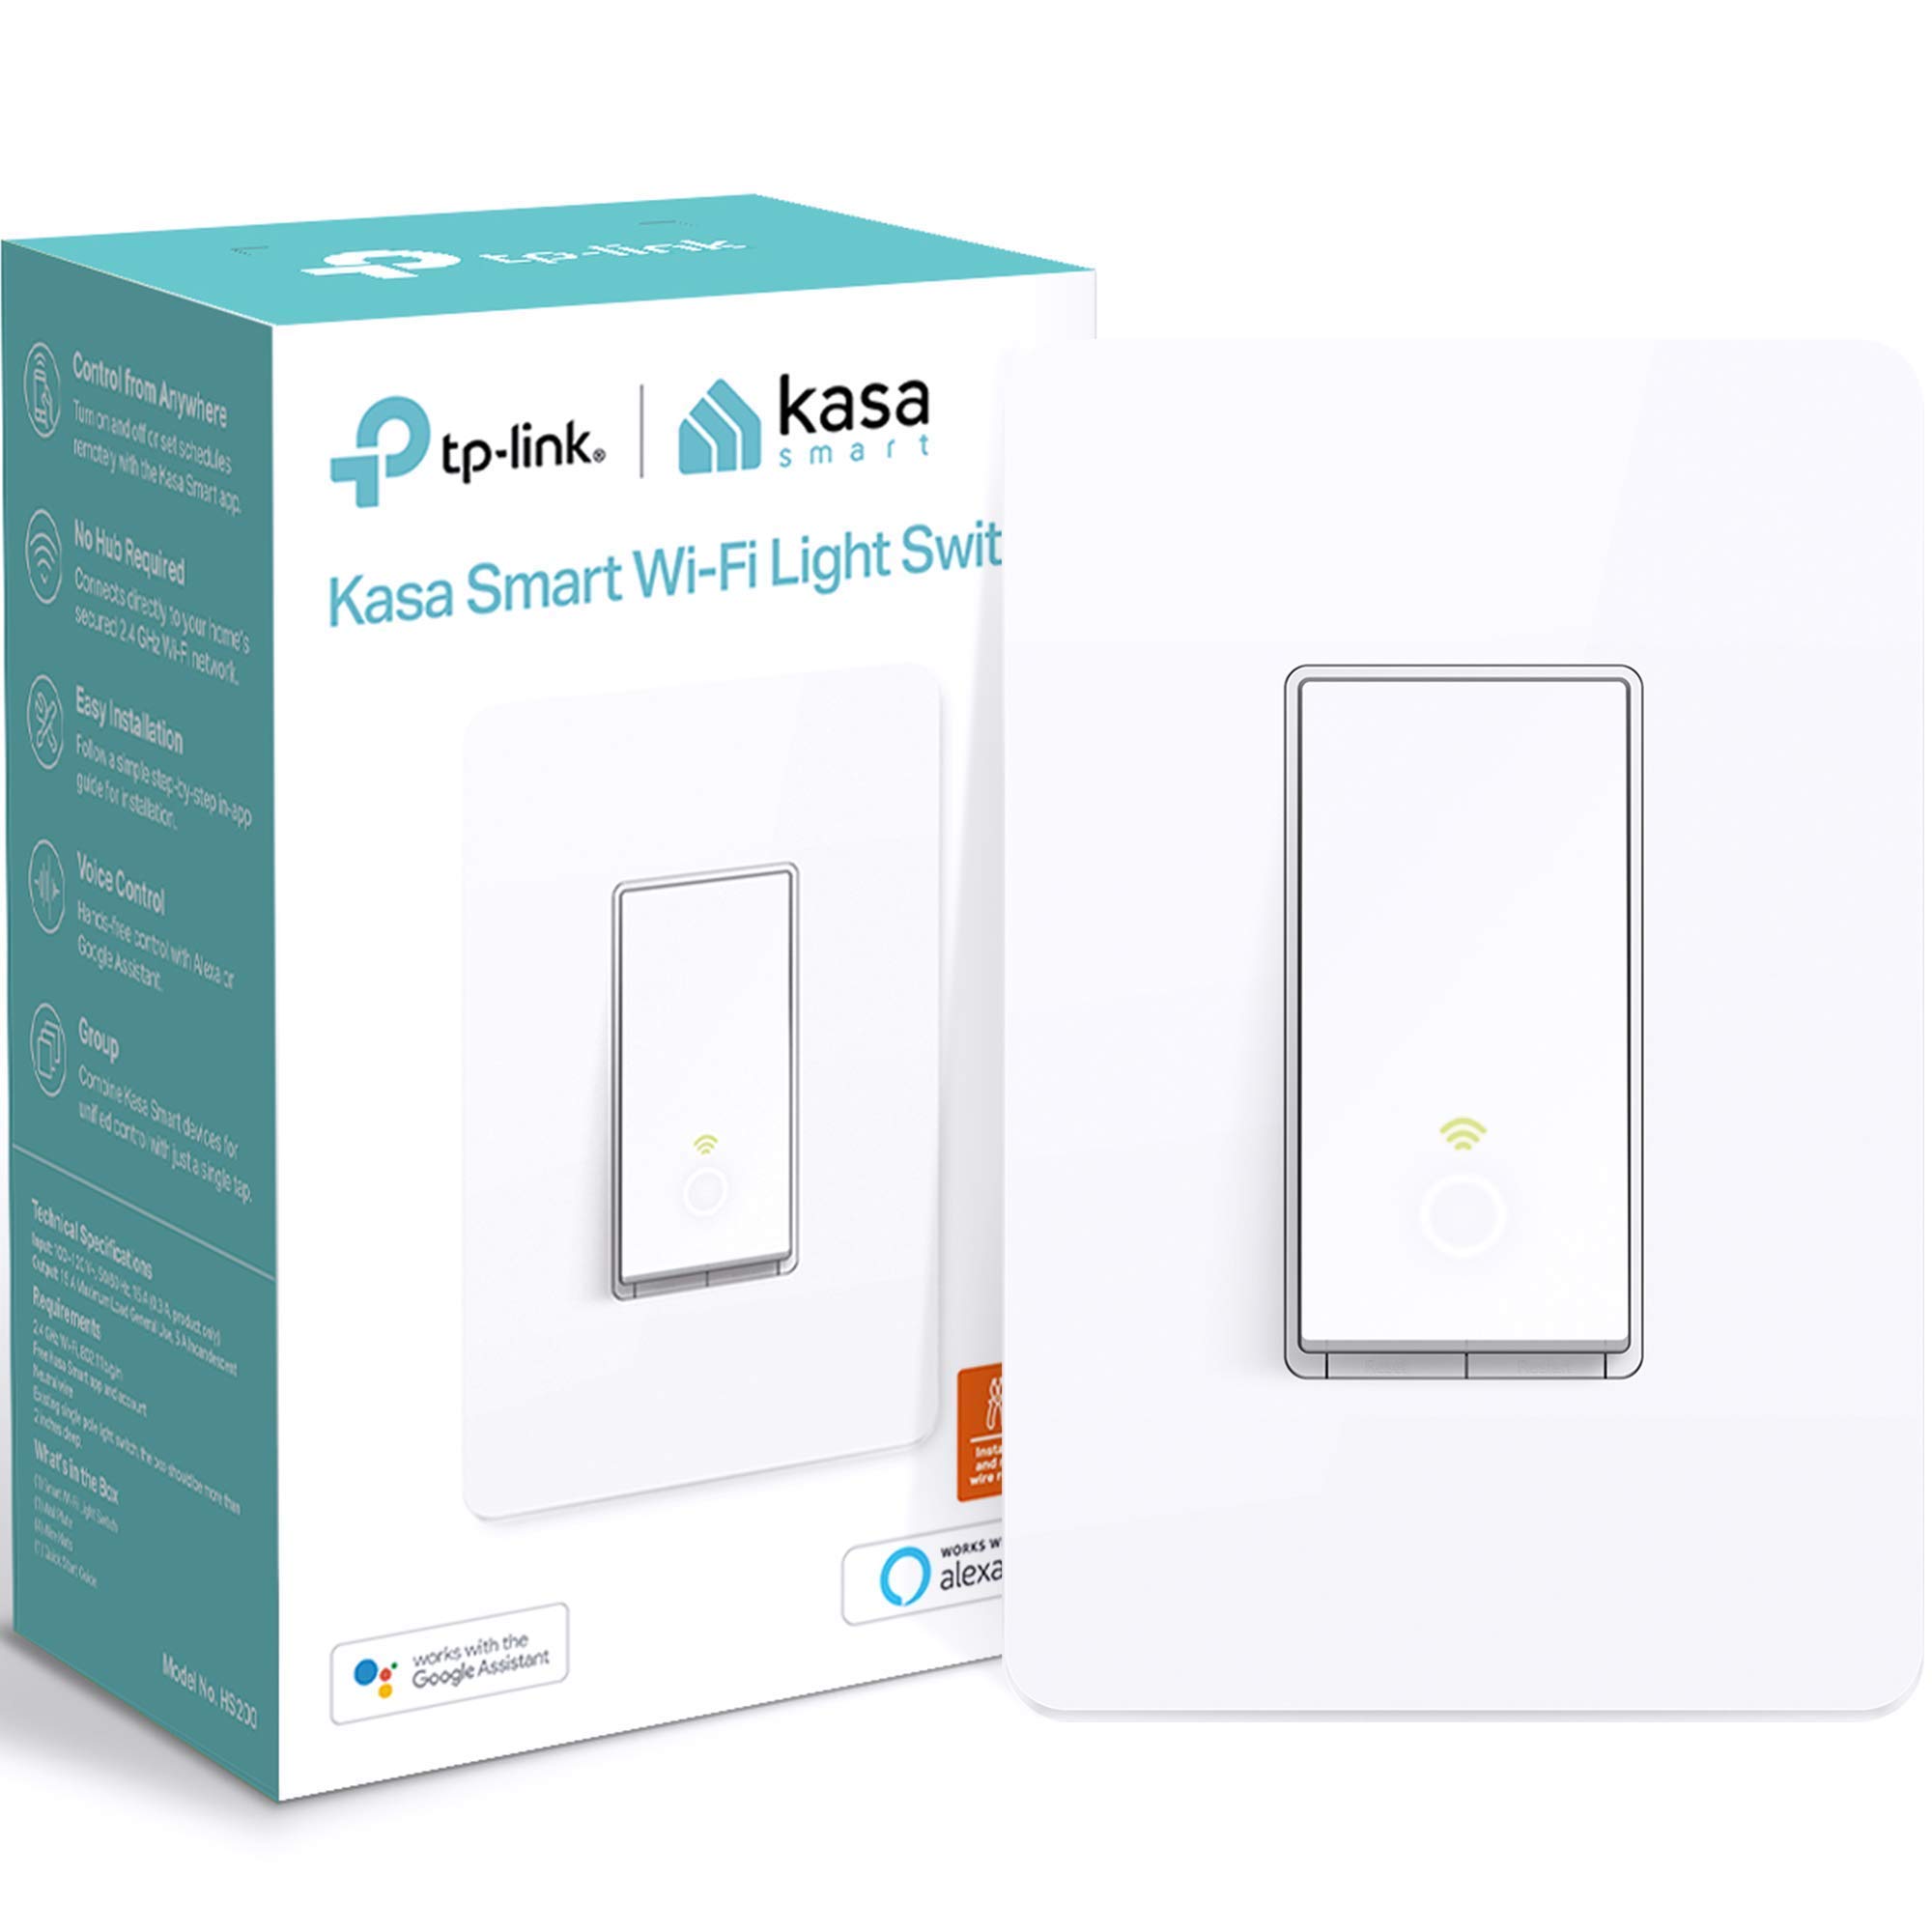 TP-Link Kasa Smart HS200 WiFi Light Switch $12.59 + Free Shipping w/ Prime or on $25+